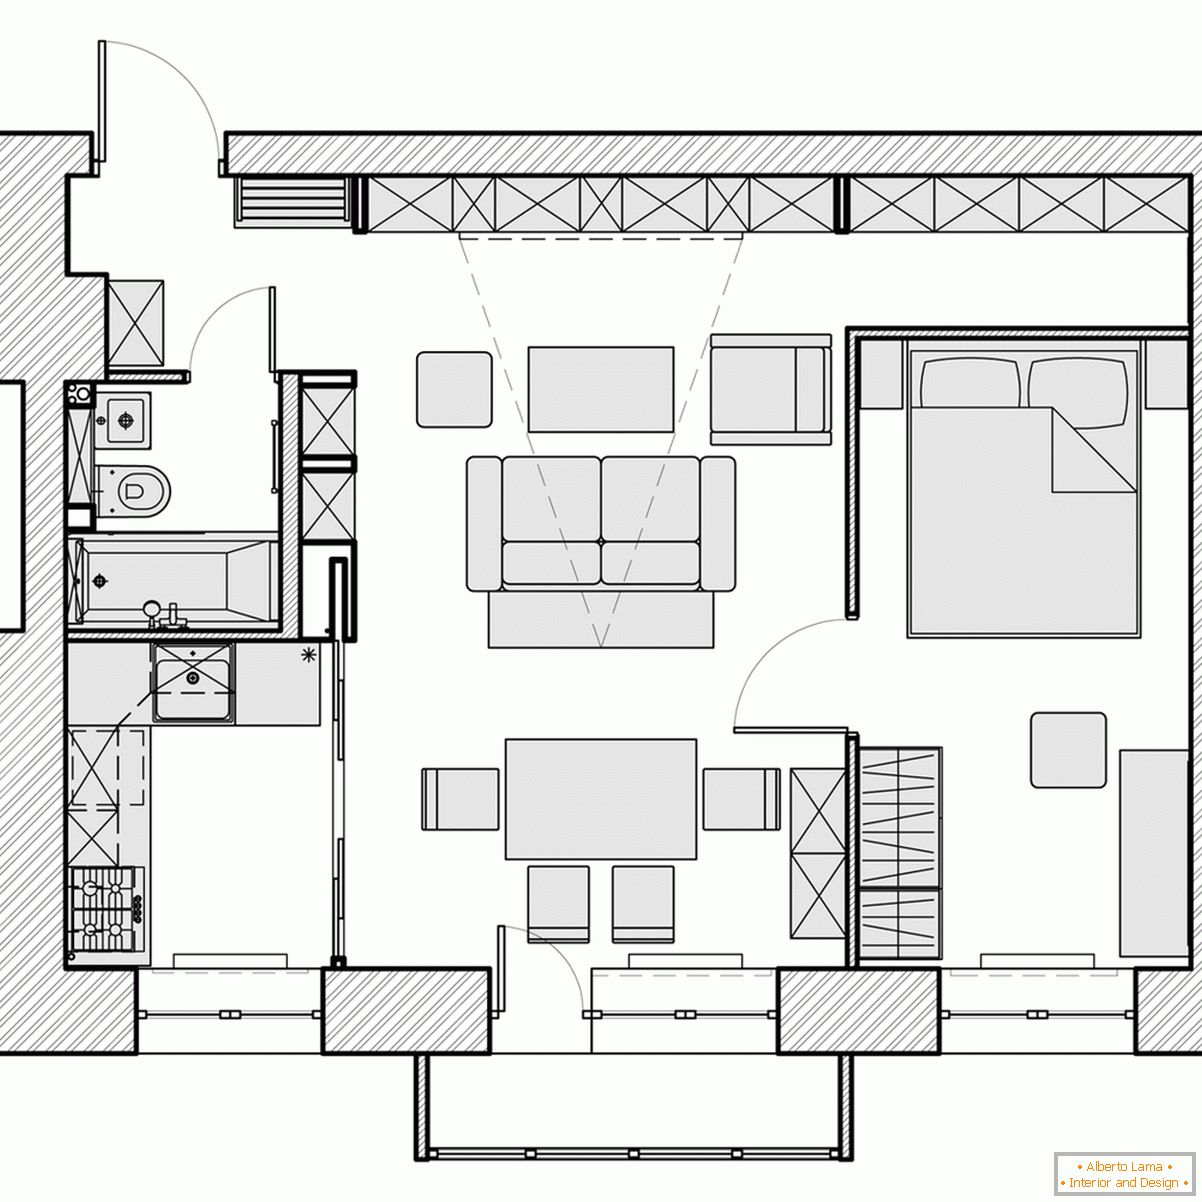 The layout of a small studio apartment - фот 3